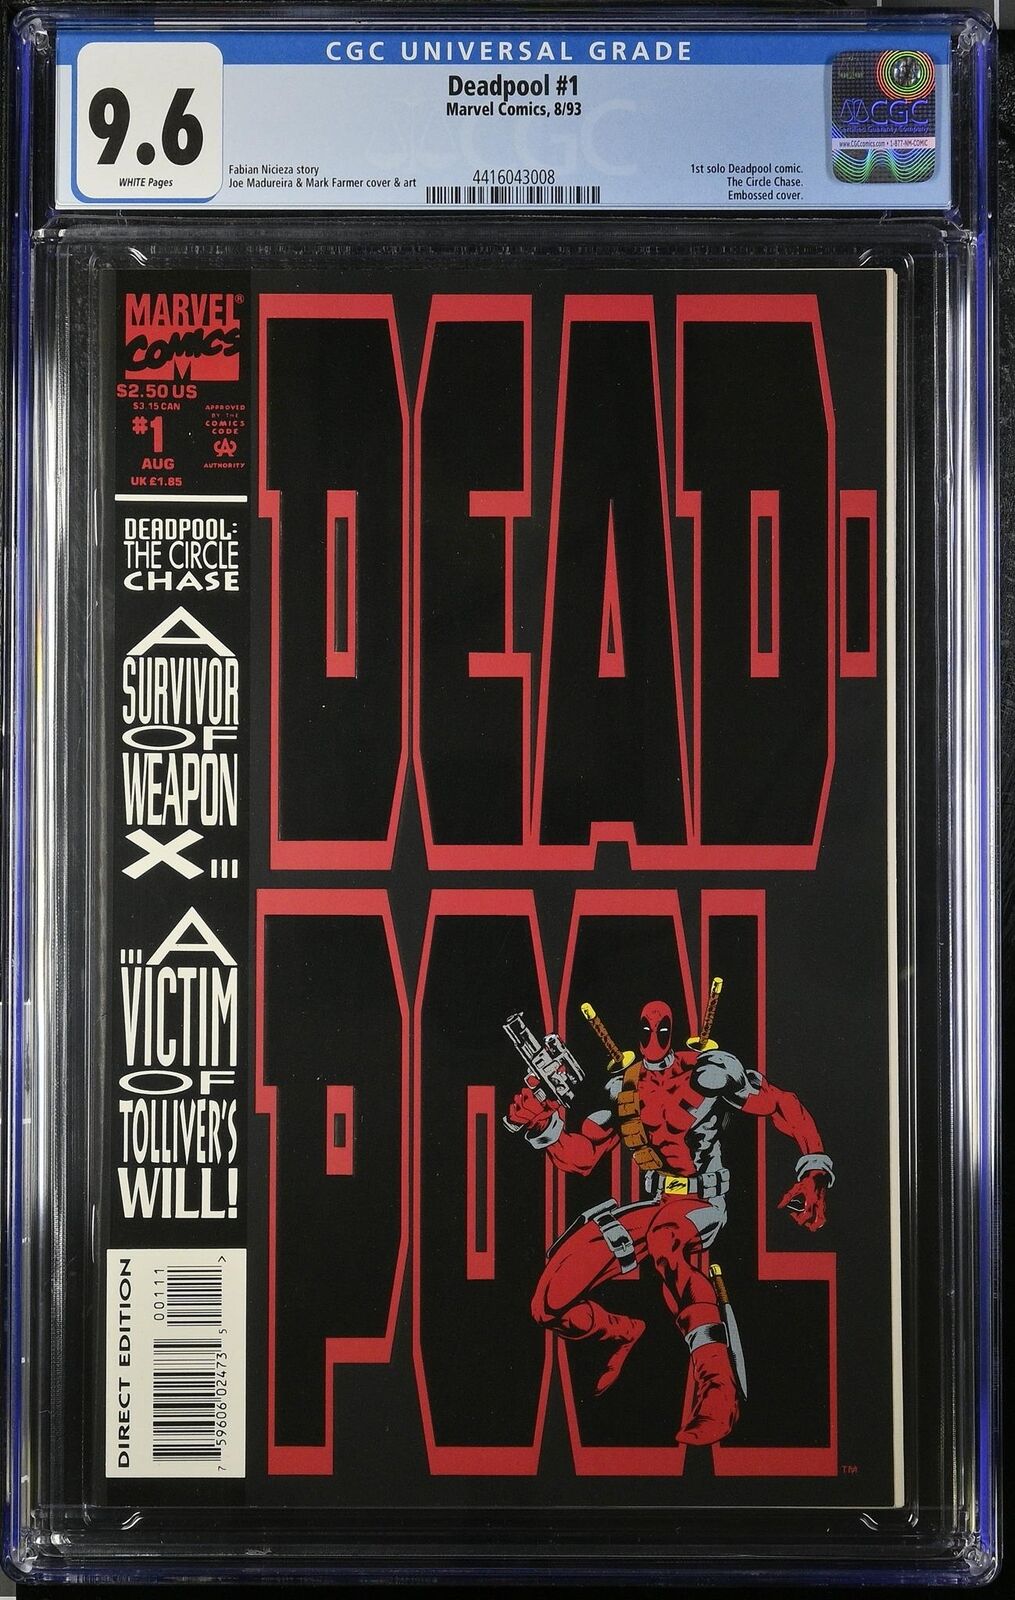 Deadpool #1 Circle Chase CGC 9.6 1993 4416043008 1st Solo Embossed Cover Key